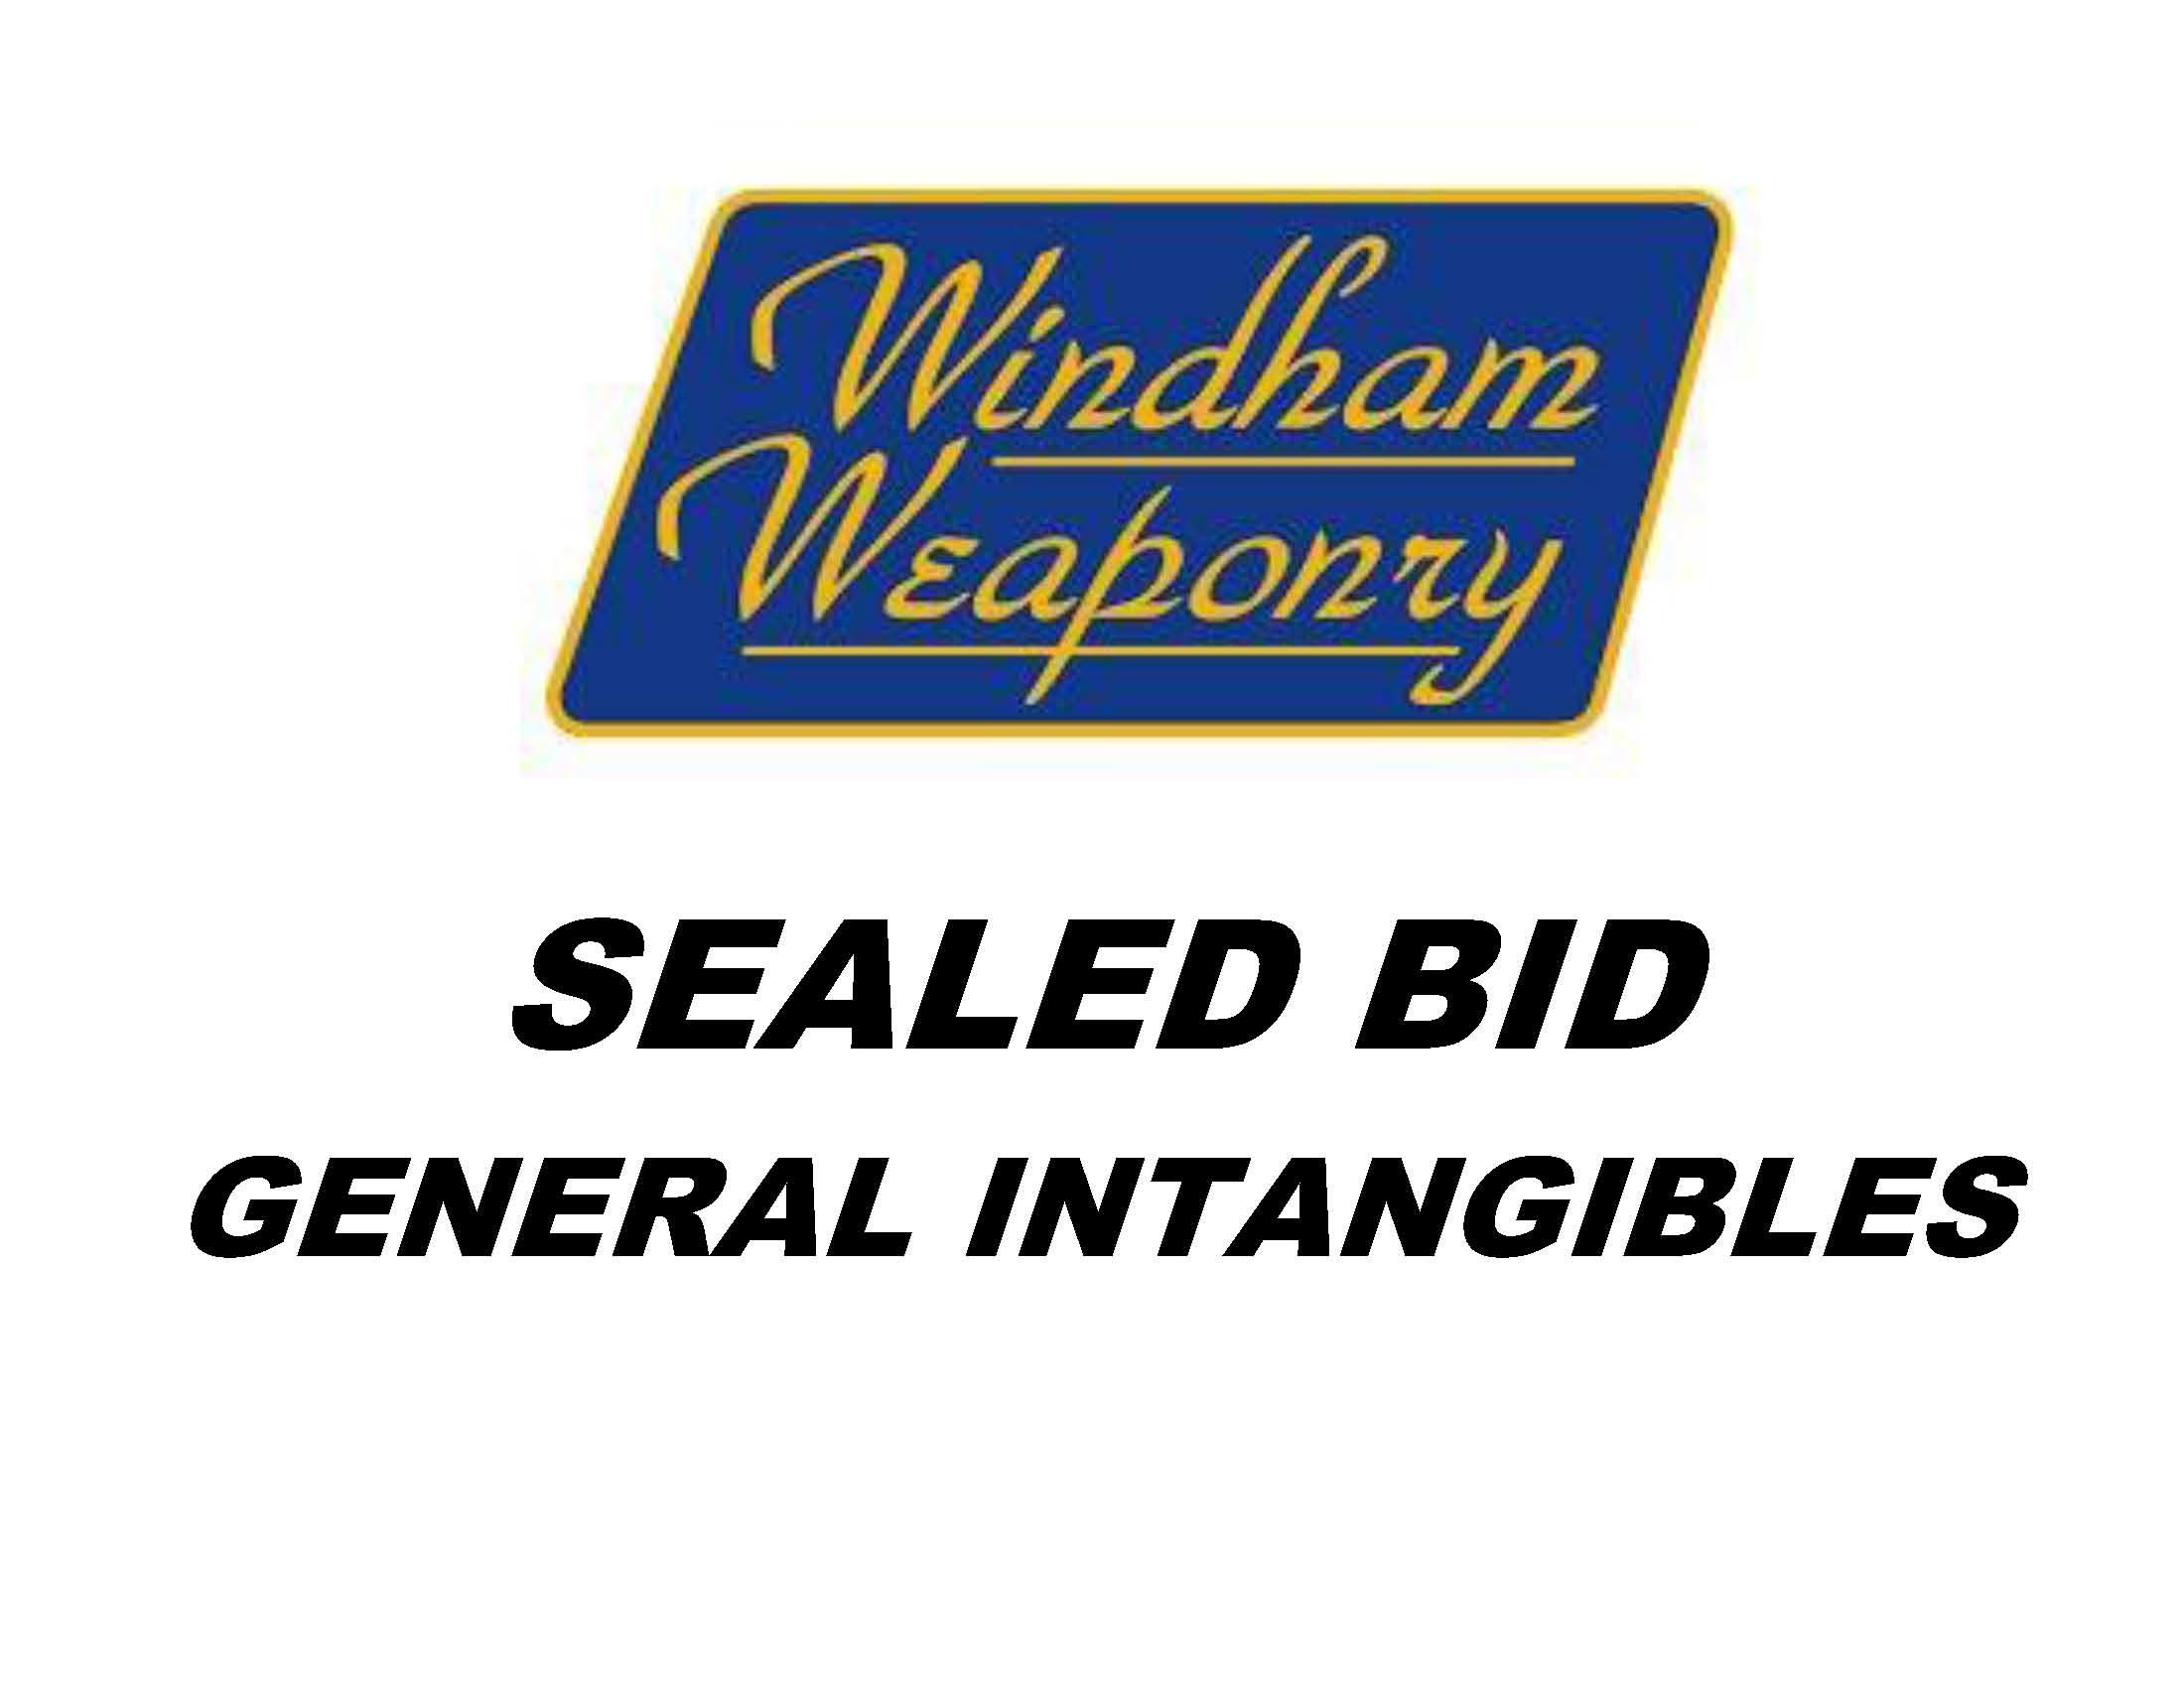 SECURED PARTY SALE BY SEALED BID ~ GENERAL INTANGIBLES OF WINDHAM WEAPONRY Auction